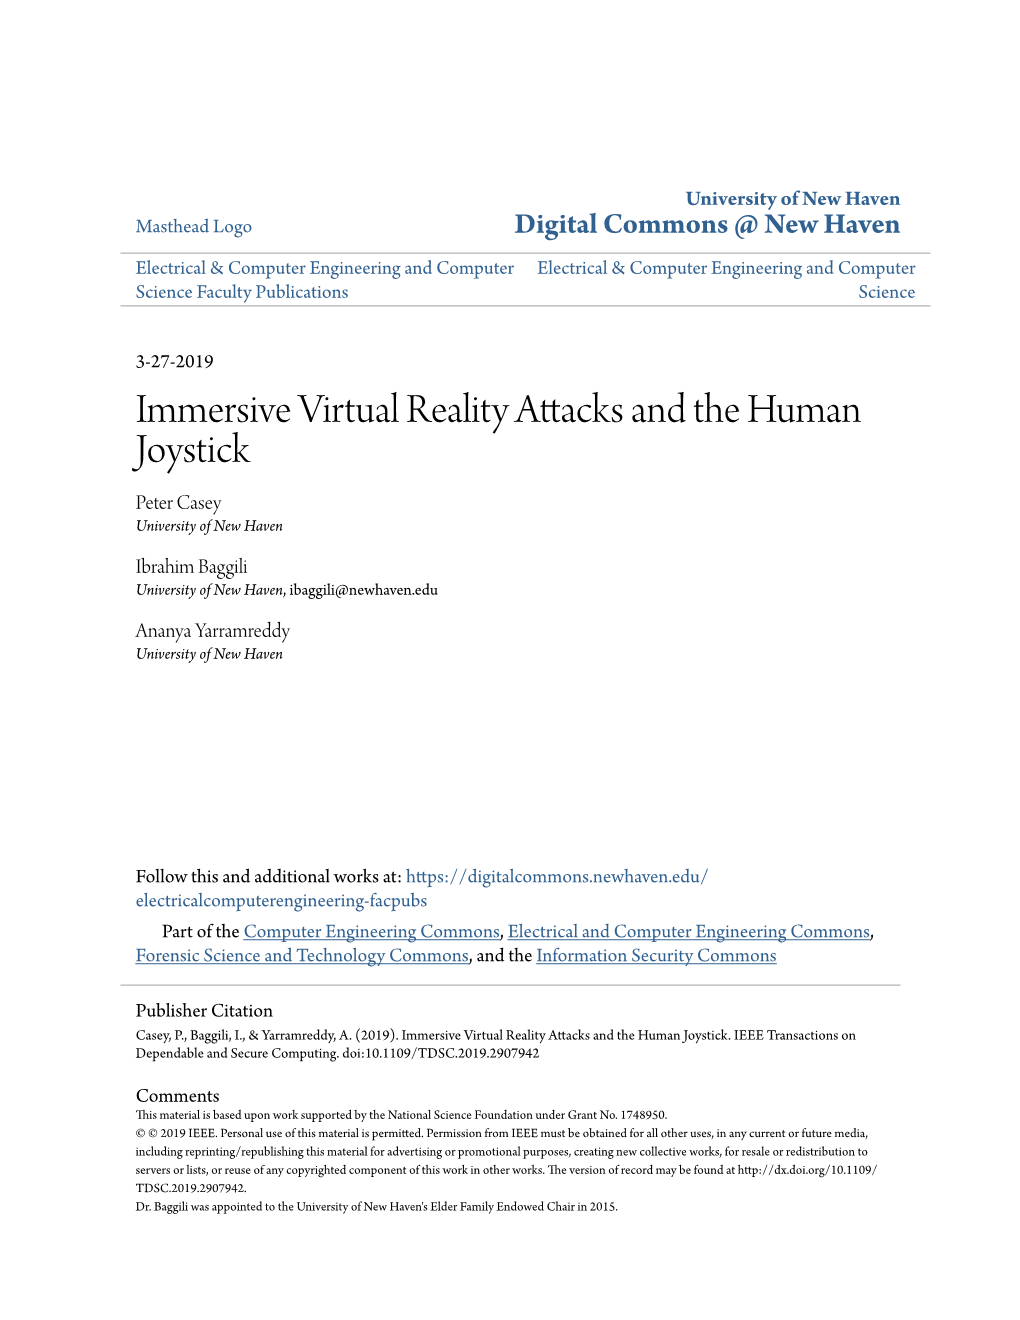 Immersive Virtual Reality Attacks and the Human Joystick Peter Casey University of New Haven